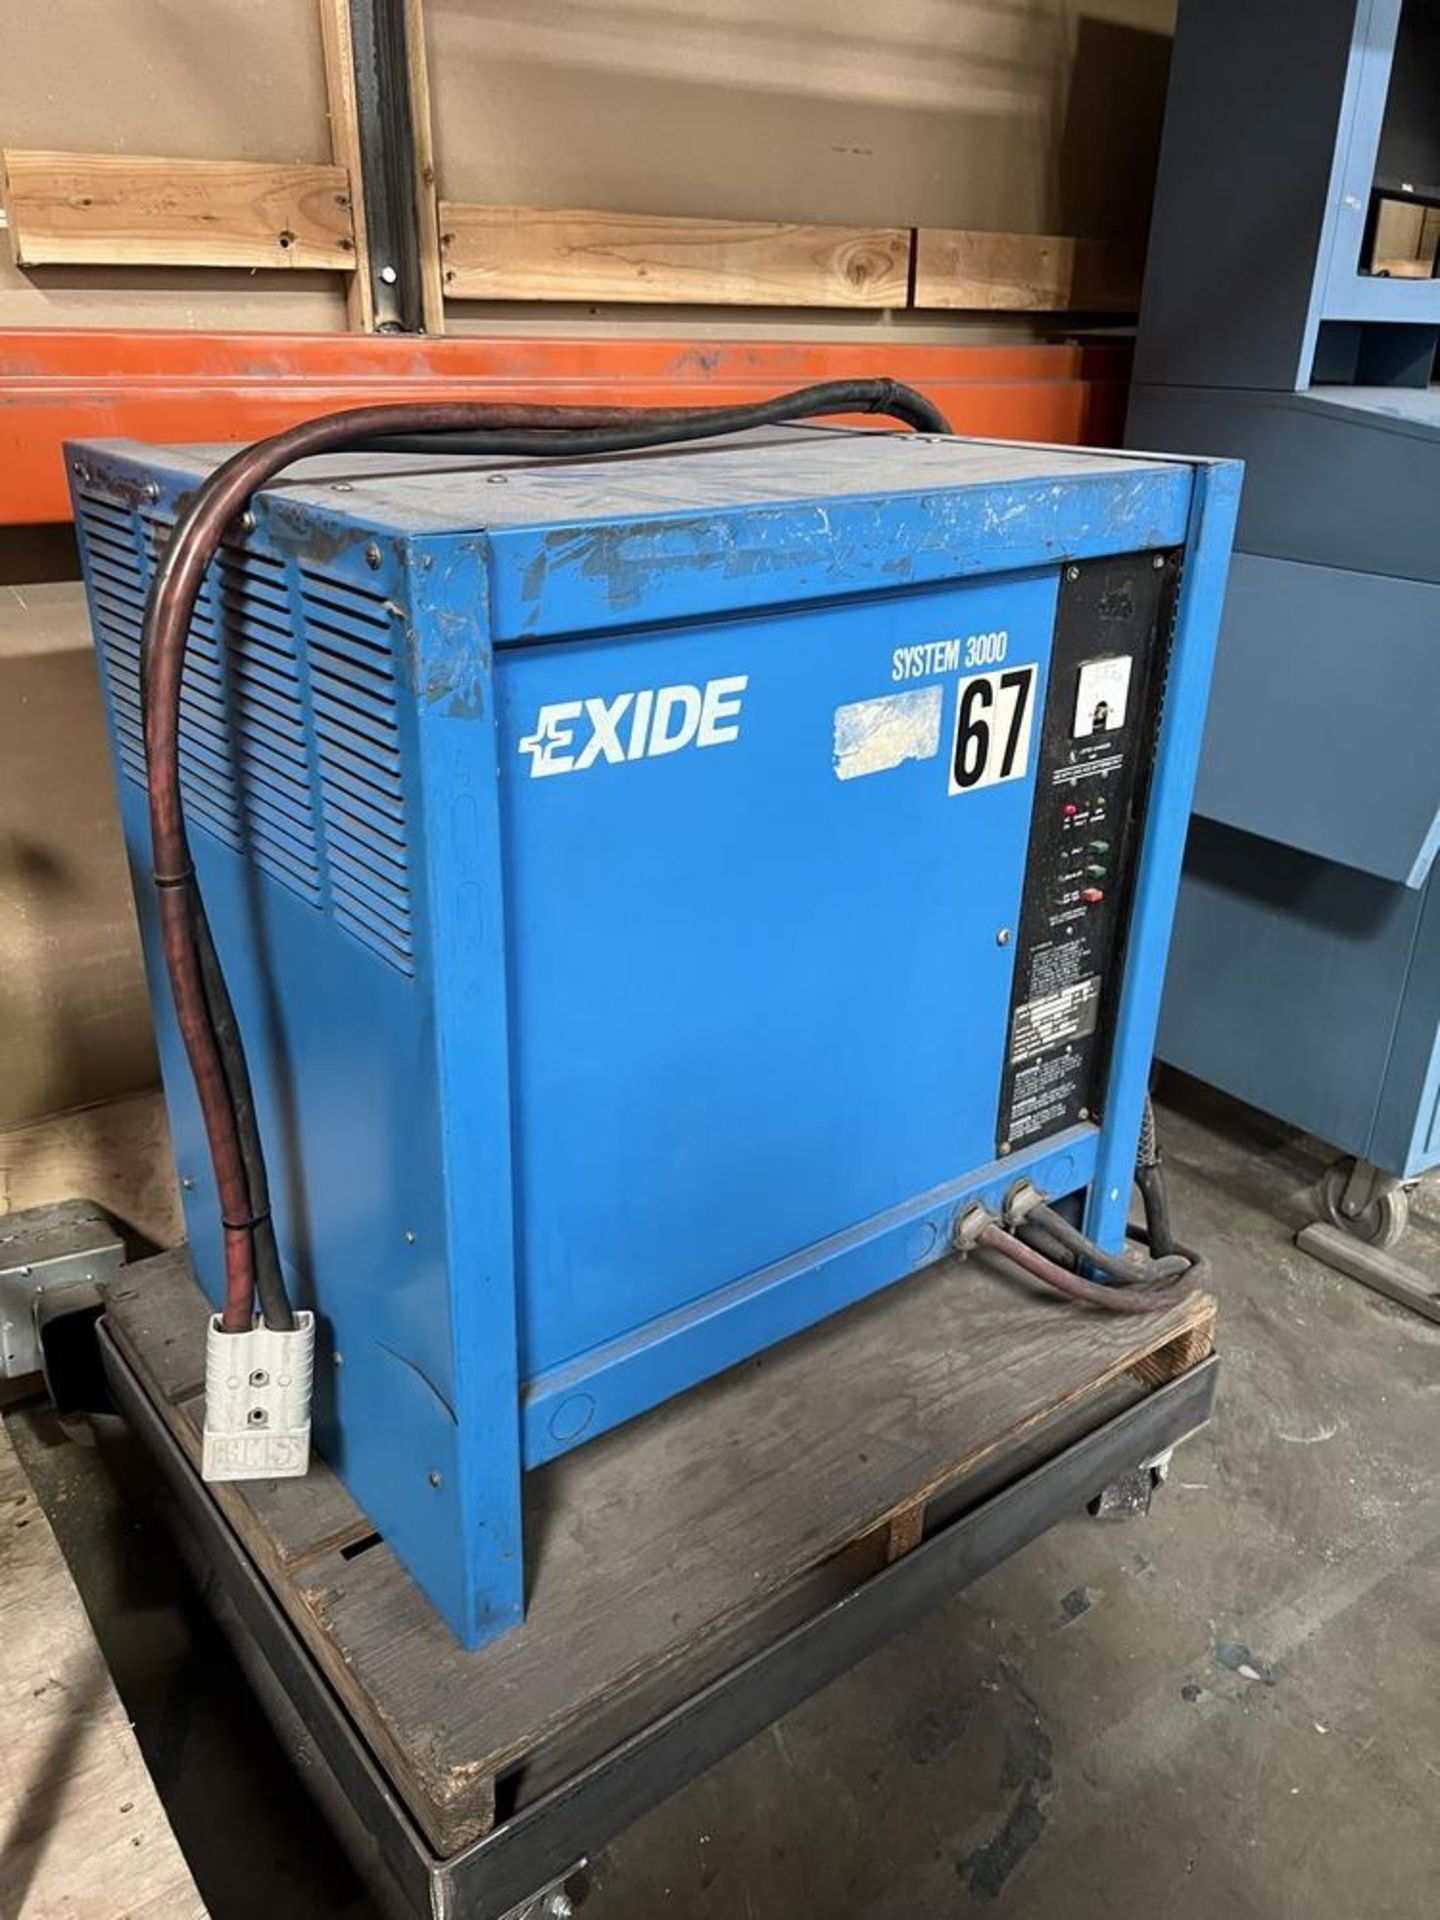 Clark Electric Forklight 1328 Hours, Side Shift, 2500 lb Capacity With Exide System 3000 Battery - Image 12 of 14